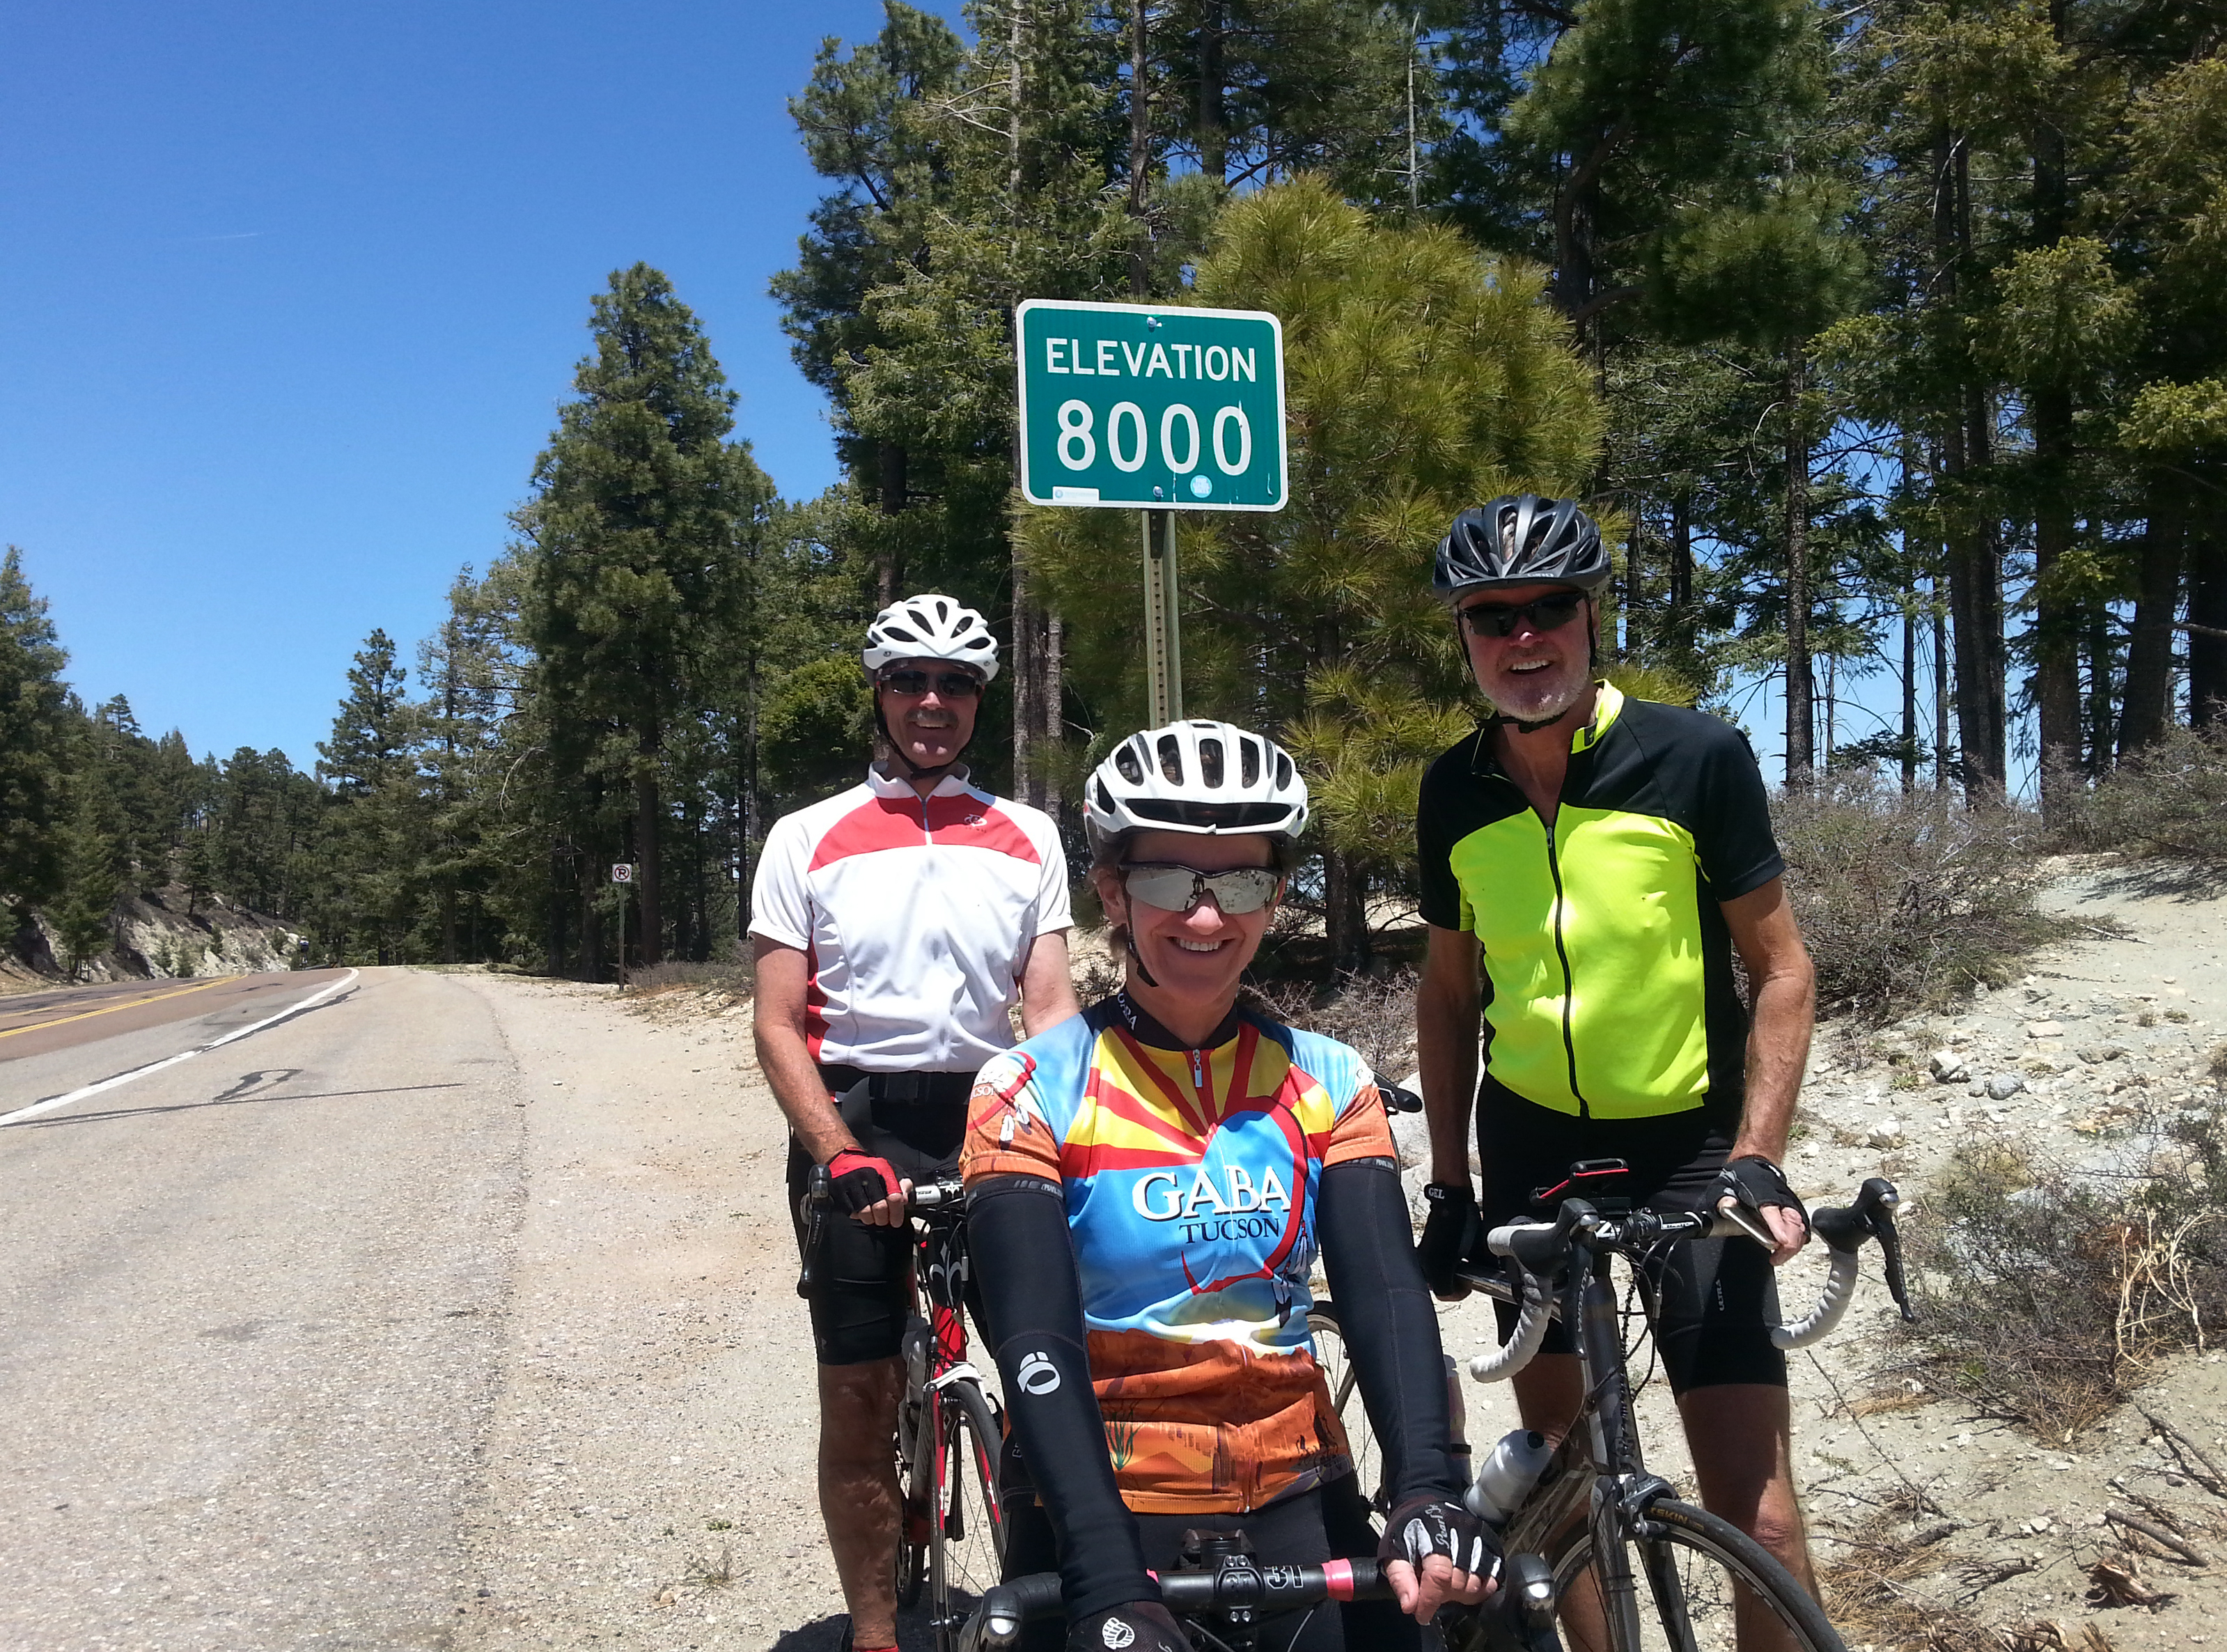 Kathleen Bober, Brian and Dave cycling on Mt. Lemmon Highway, elevation 8000 feet